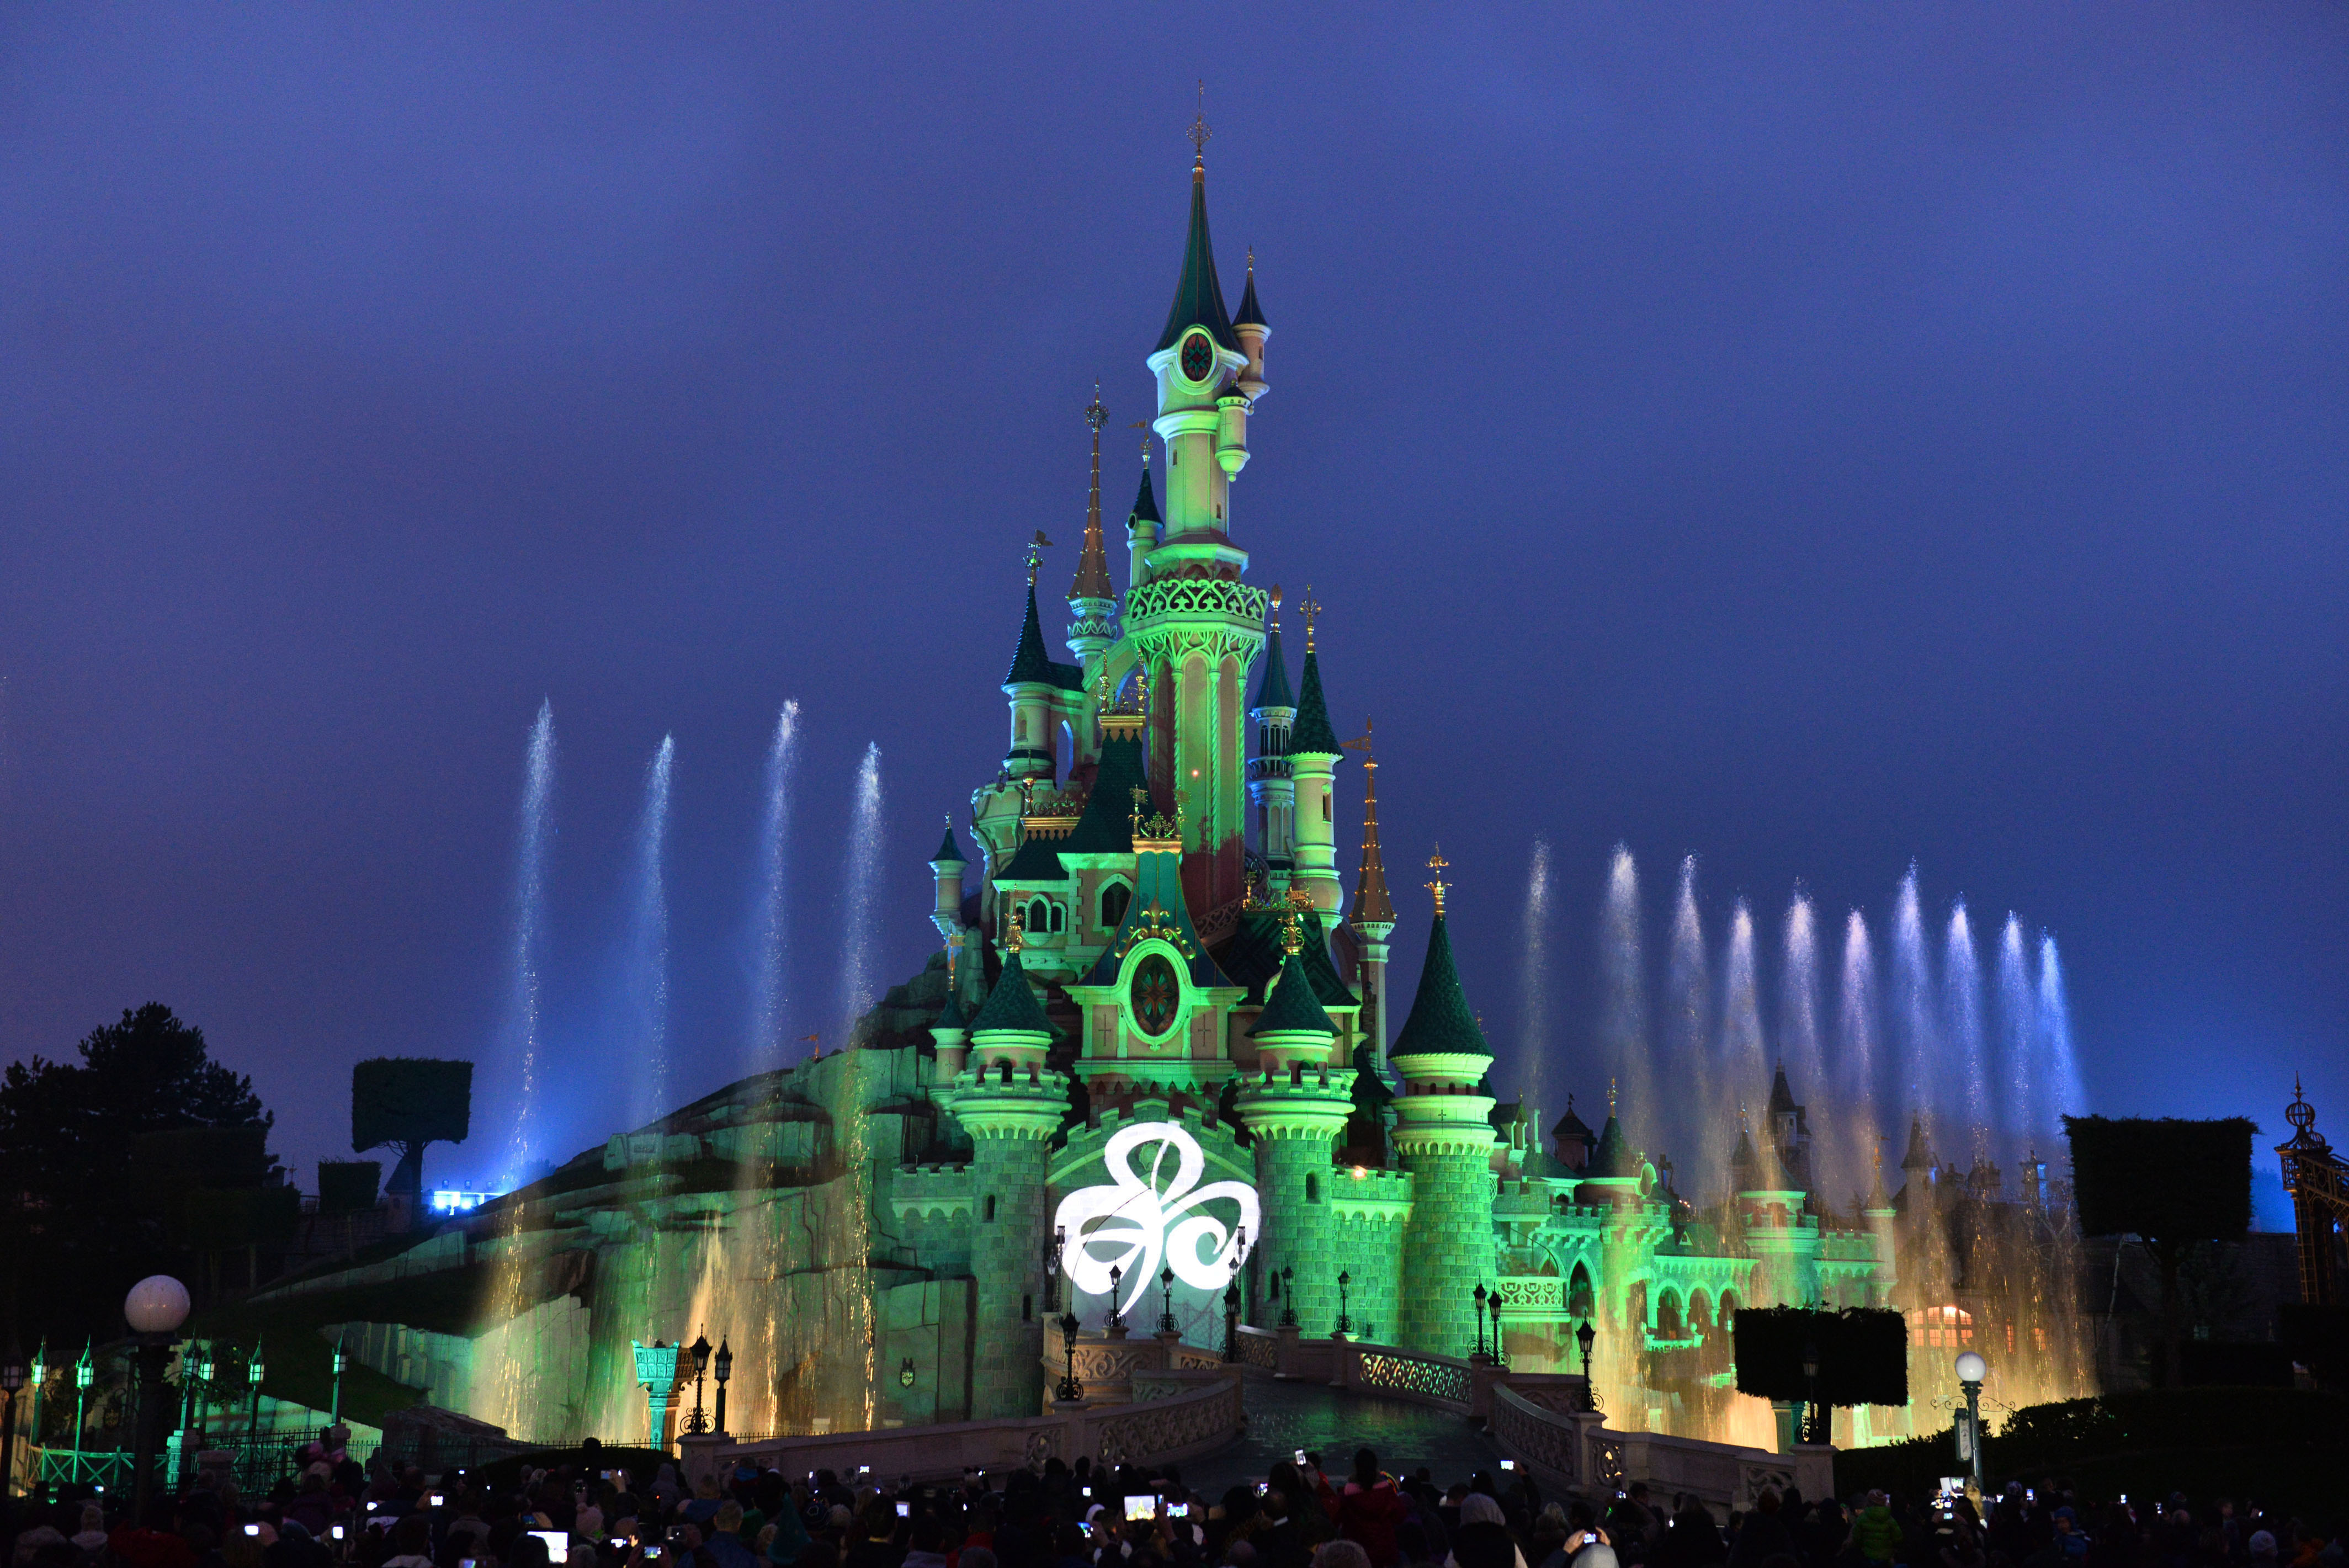 While across the Channel in France, Sleeping Beauty’s Castle at Disneyland Paris also turned green (Tourism Ireland/PA)